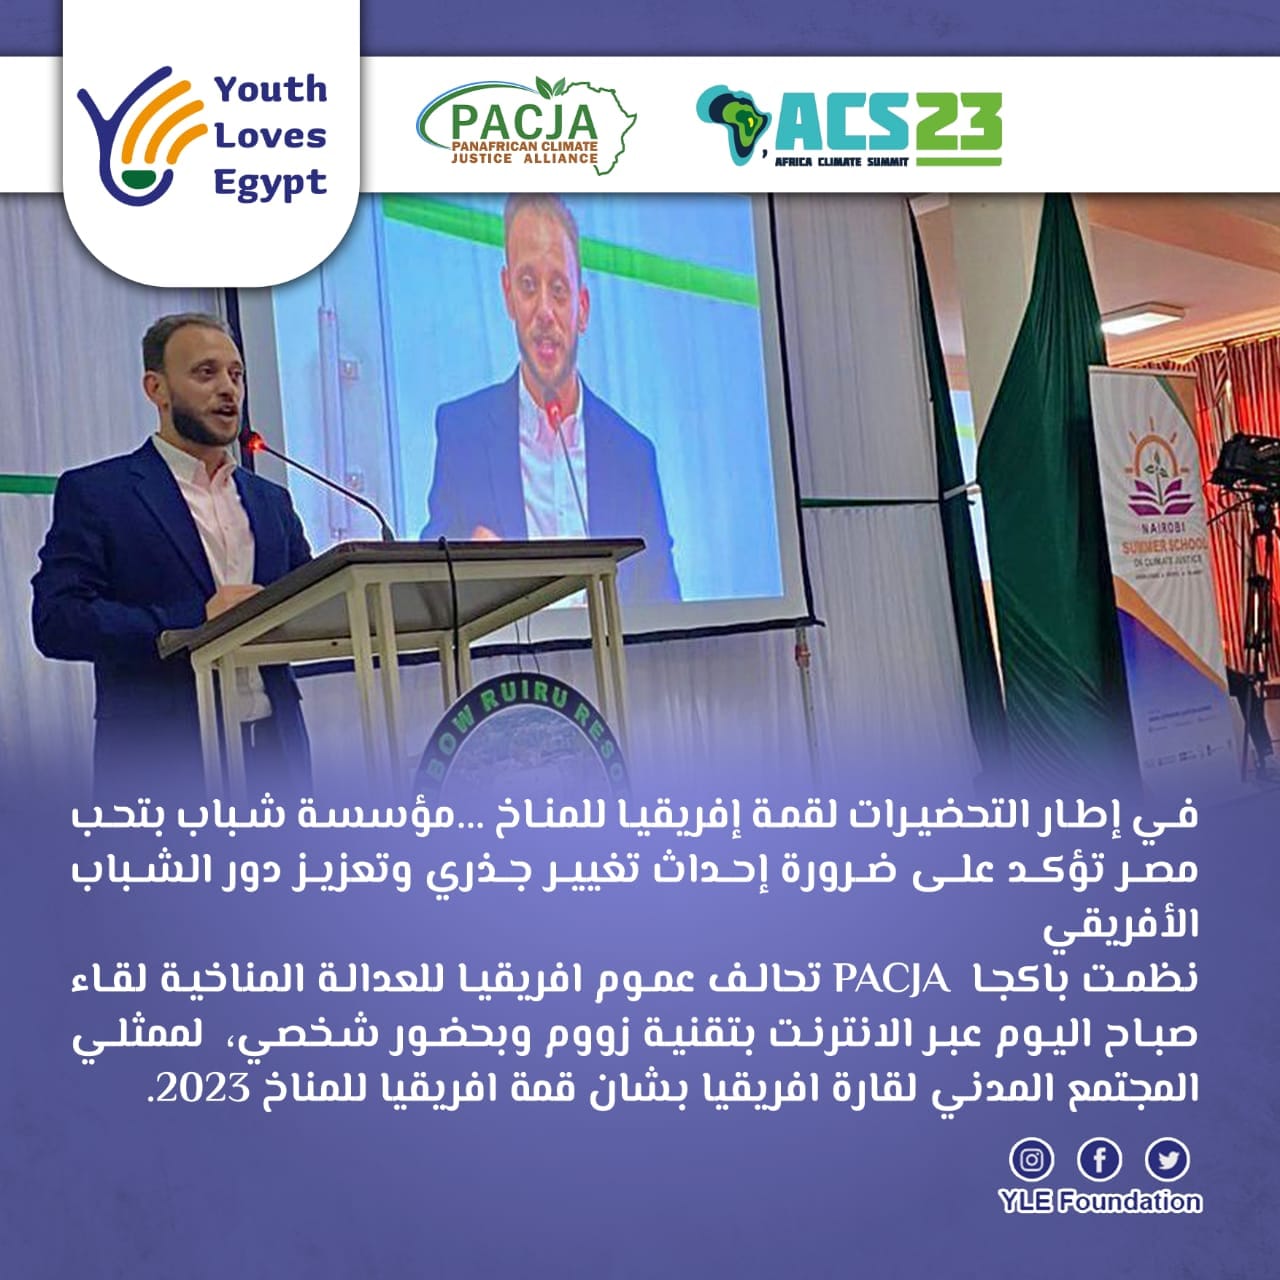  Youth Love Egypt Foundation calls for radical change and strengthening youth role